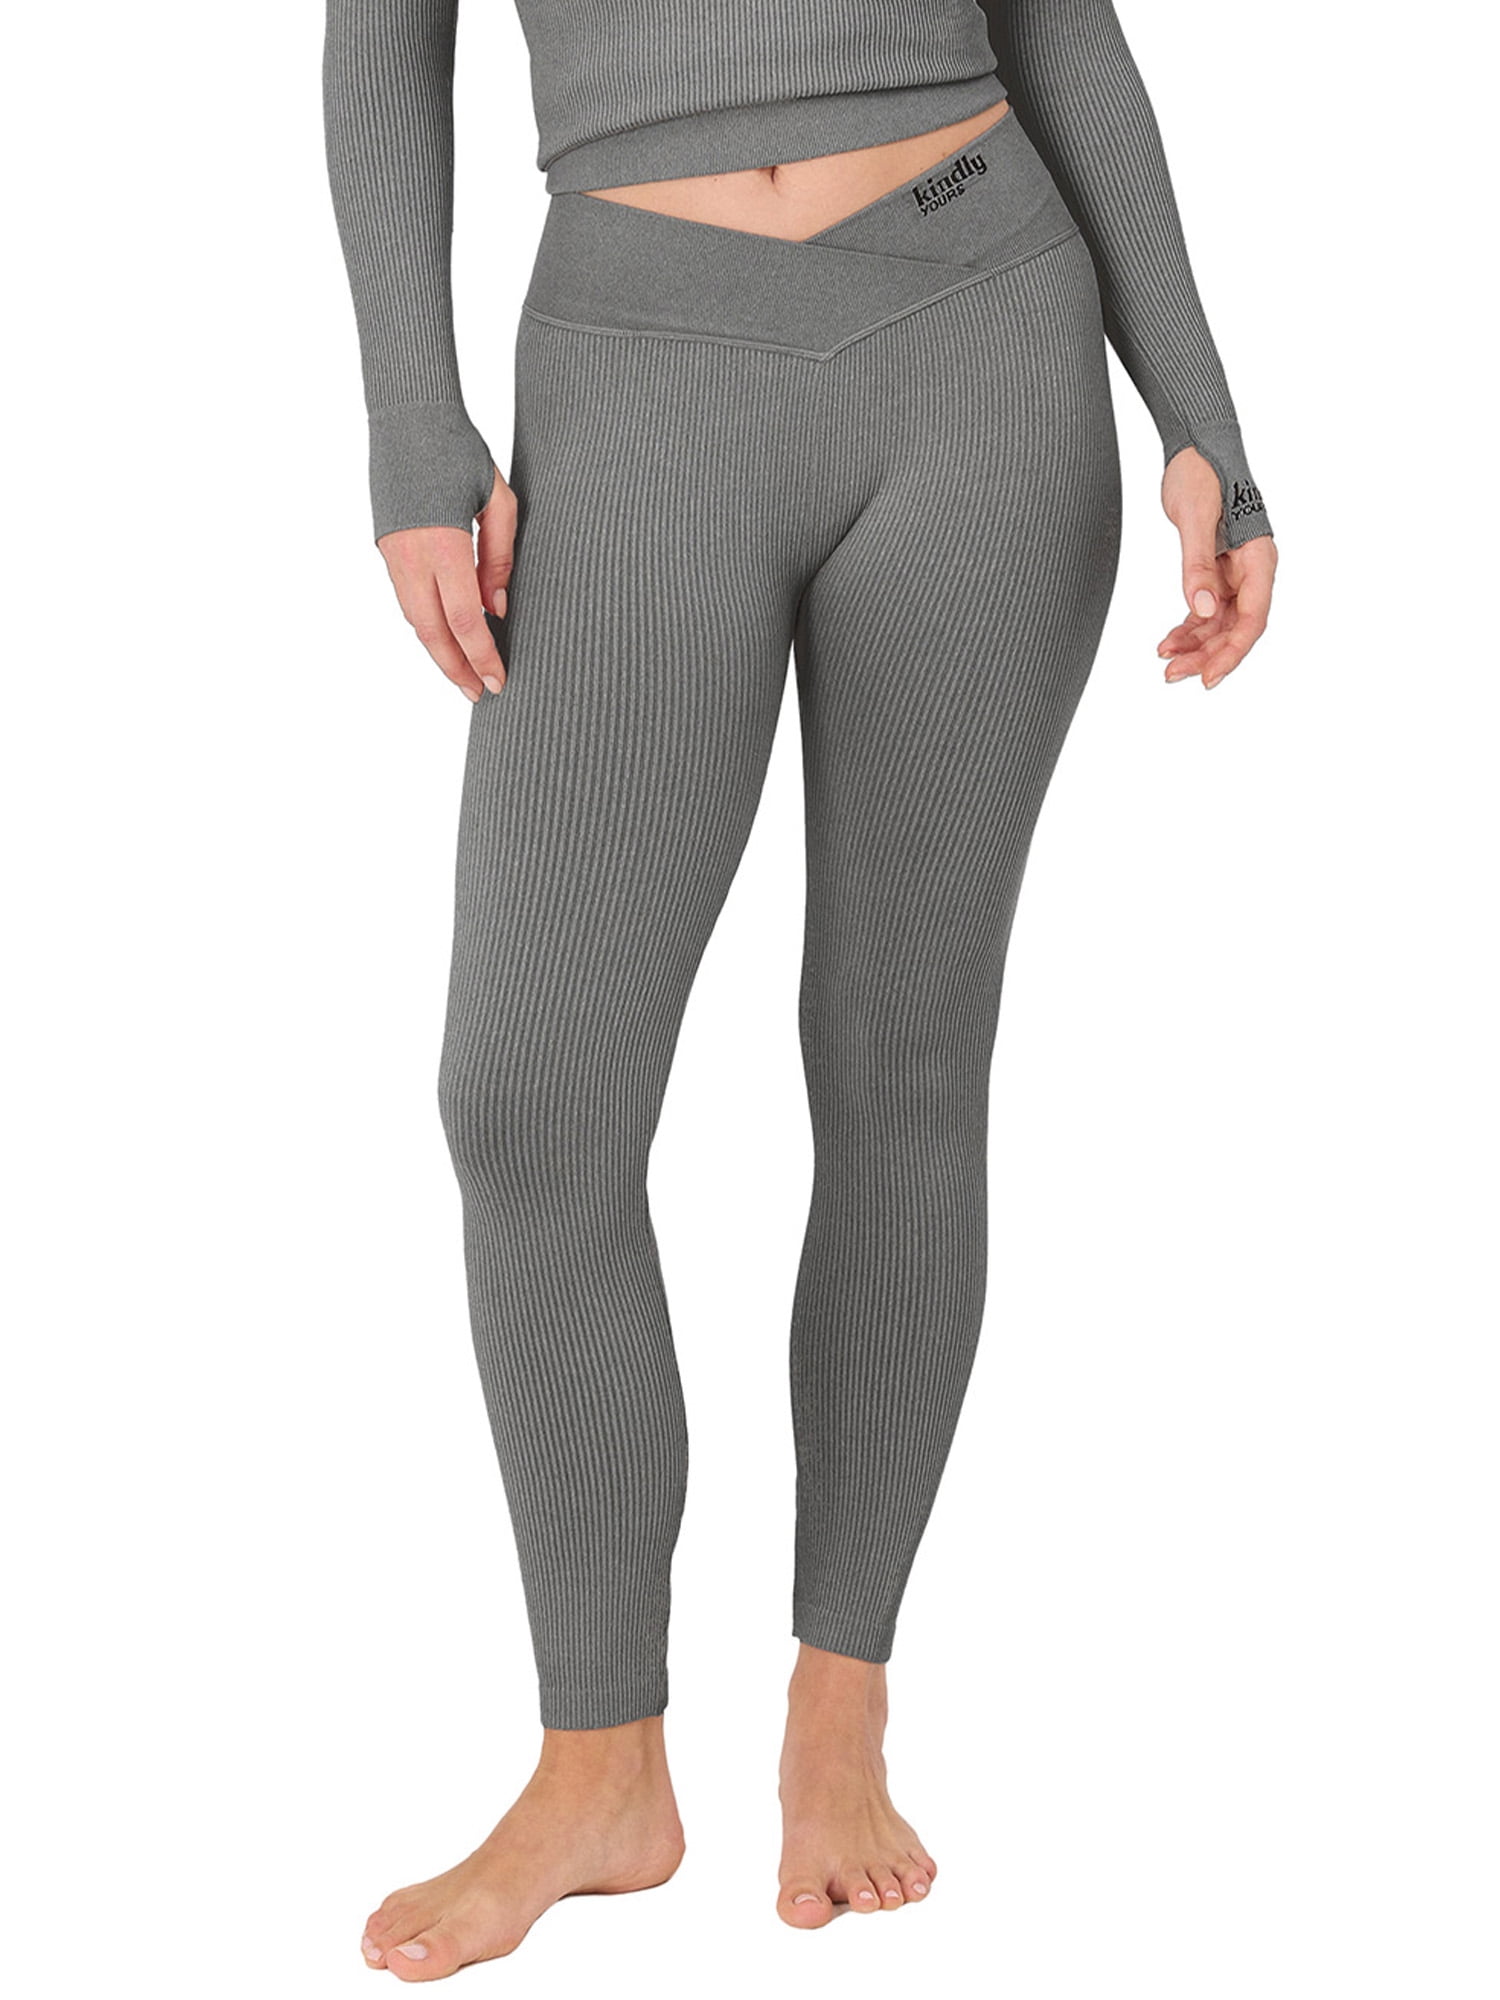 kindly yours Women's Sustainable Seamless Thermal Leggings